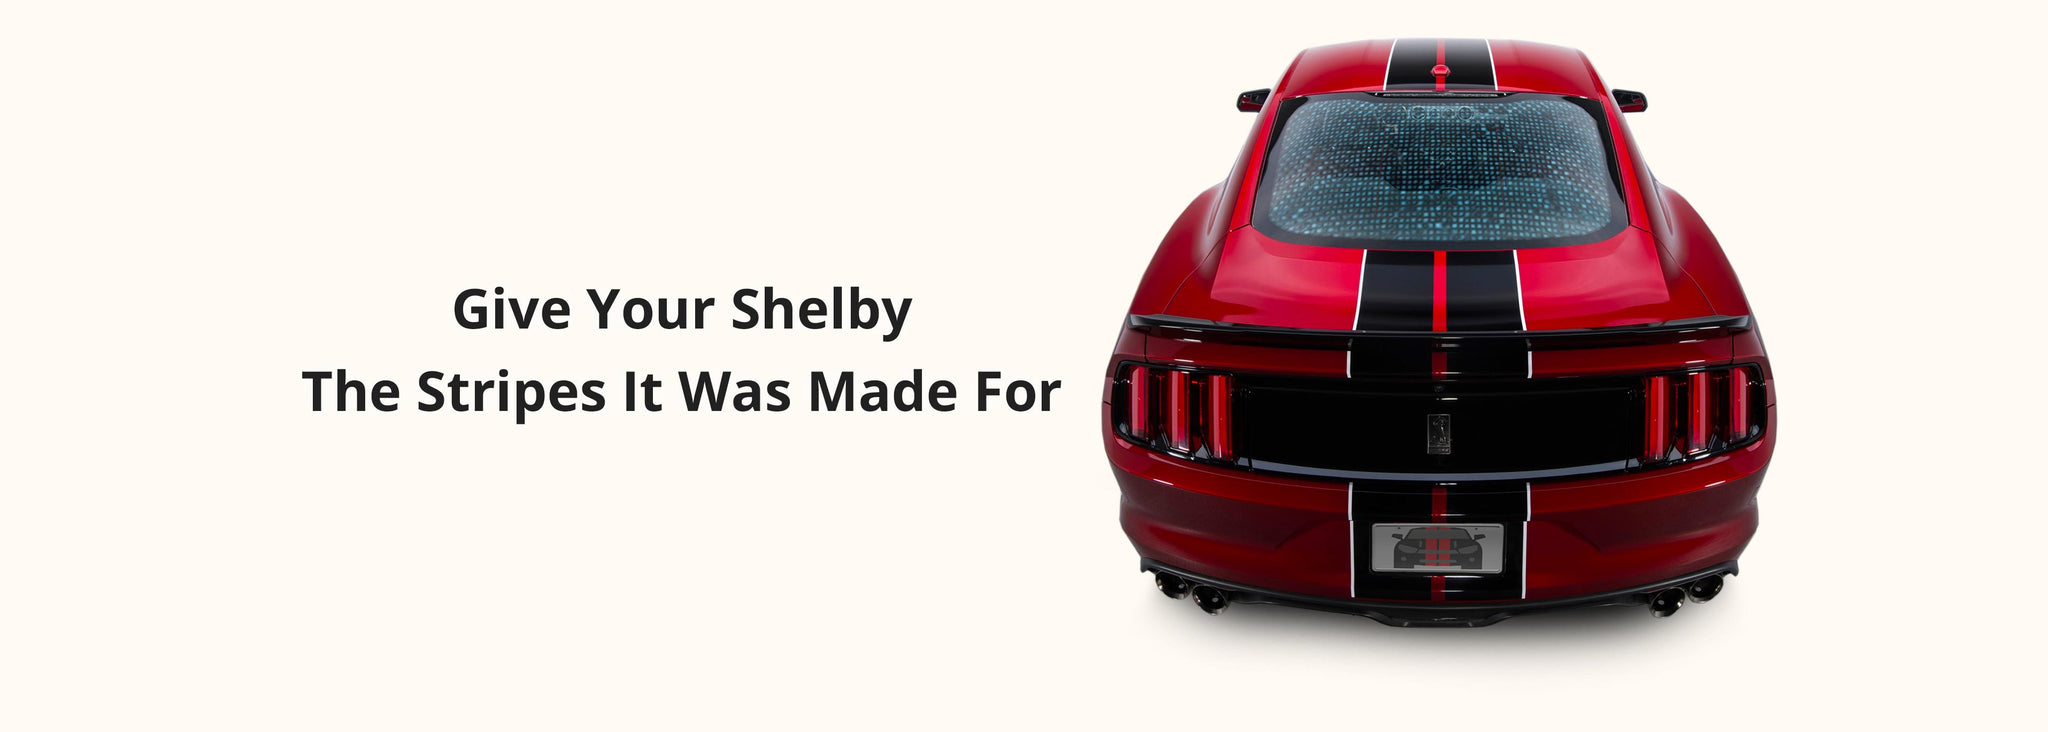 Shelby GT350 Stripes with Pinstriping (Dual Rally Racing Stripes for a Ford Mustang, 2015-2020) - Stripe Source